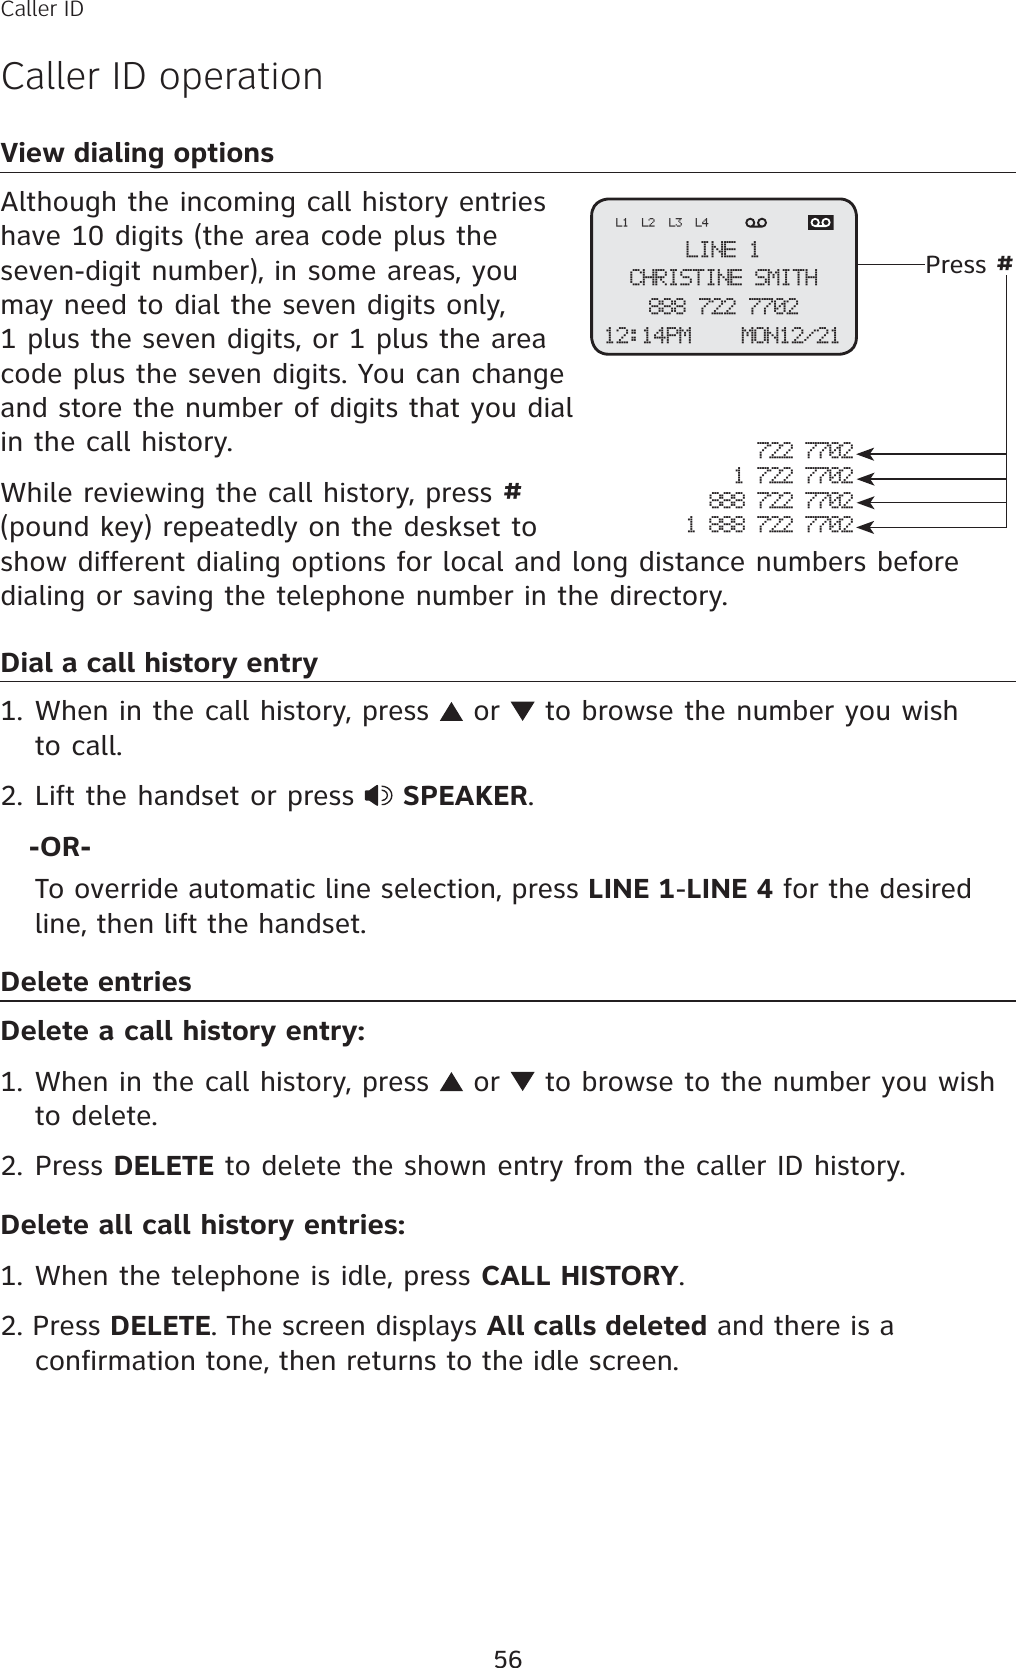 56View dialing optionsAlthough the incoming call history entries have 10 digits (the area code plus the seven-digit number), in some areas, you may need to dial the seven digits only, 1 plus the seven digits, or 1 plus the area code plus the seven digits. You can change and store the number of digits that you dial in the call history. While reviewing the call history, press #(pound key) repeatedly on the deskset to show different dialing options for local and long distance numbers before dialing or saving the telephone number in the directory.Dial a call history entryWhen in the call history, press   or   to browse the number you wish to call. Lift the handset or press  SPEAKER.   -OR-To override automatic line selection, press LINE 1-LINE 4 for the desired line, then lift the handset.Delete entriesDelete a call history entry:When in the call history, press   or   to browse to the number you wish to delete. Press DELETE to delete the shown entry from the caller ID history. Delete all call history entries:When the telephone is idle, press CALL HISTORY.2. Press DELETE. The screen displays All calls deleted and there is a confirmation tone, then returns to the idle screen.1.2.1.2.1.Caller IDCaller ID operation722 77021 722 7702888 722 77021 888 722 7702Press #LINE 1CHRISTINE SMITH888 722 770212:14PM    MON12/21L1 L2 L3 L4